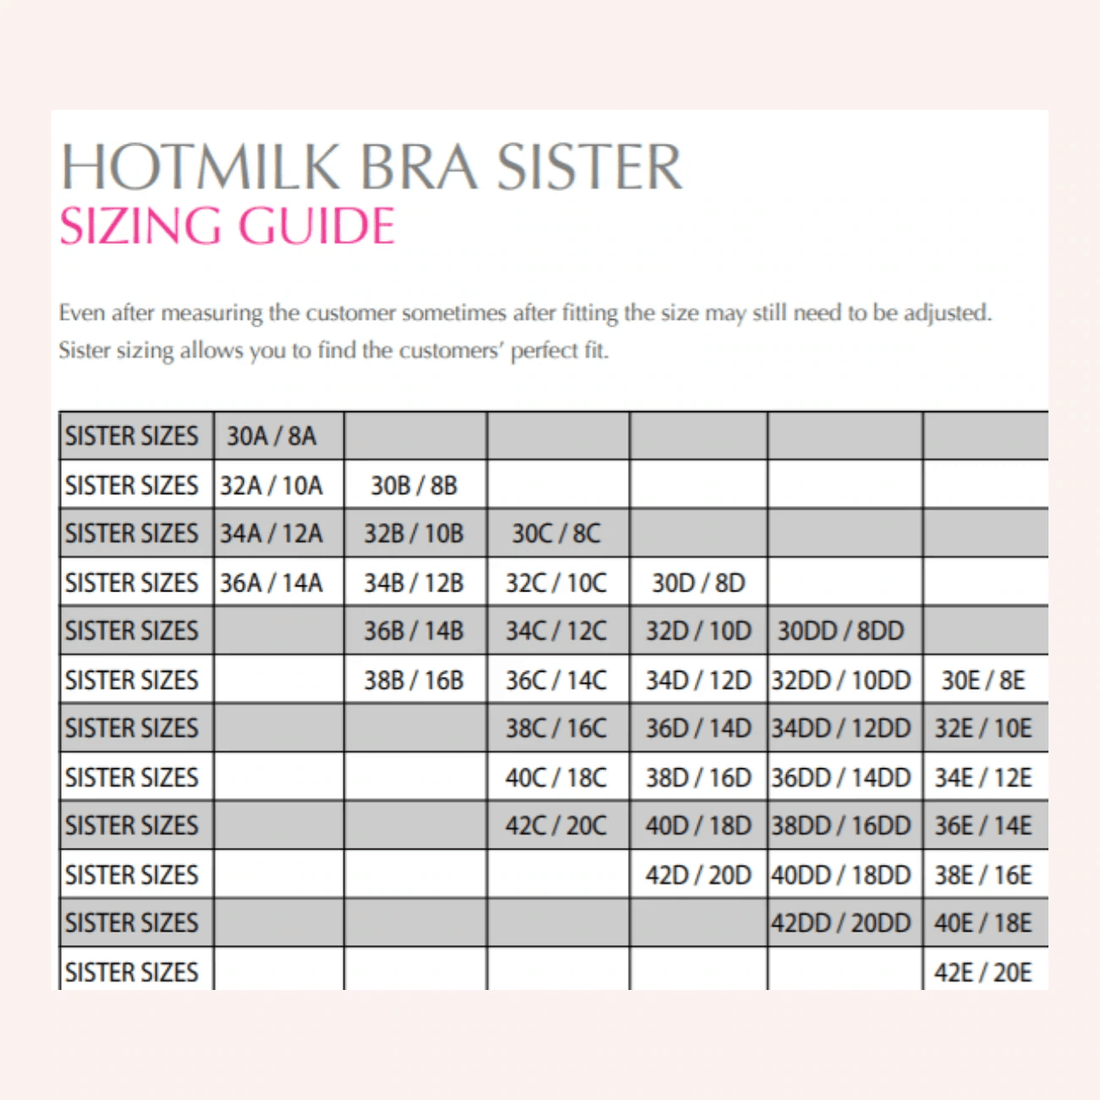 Bra sister sizing guide